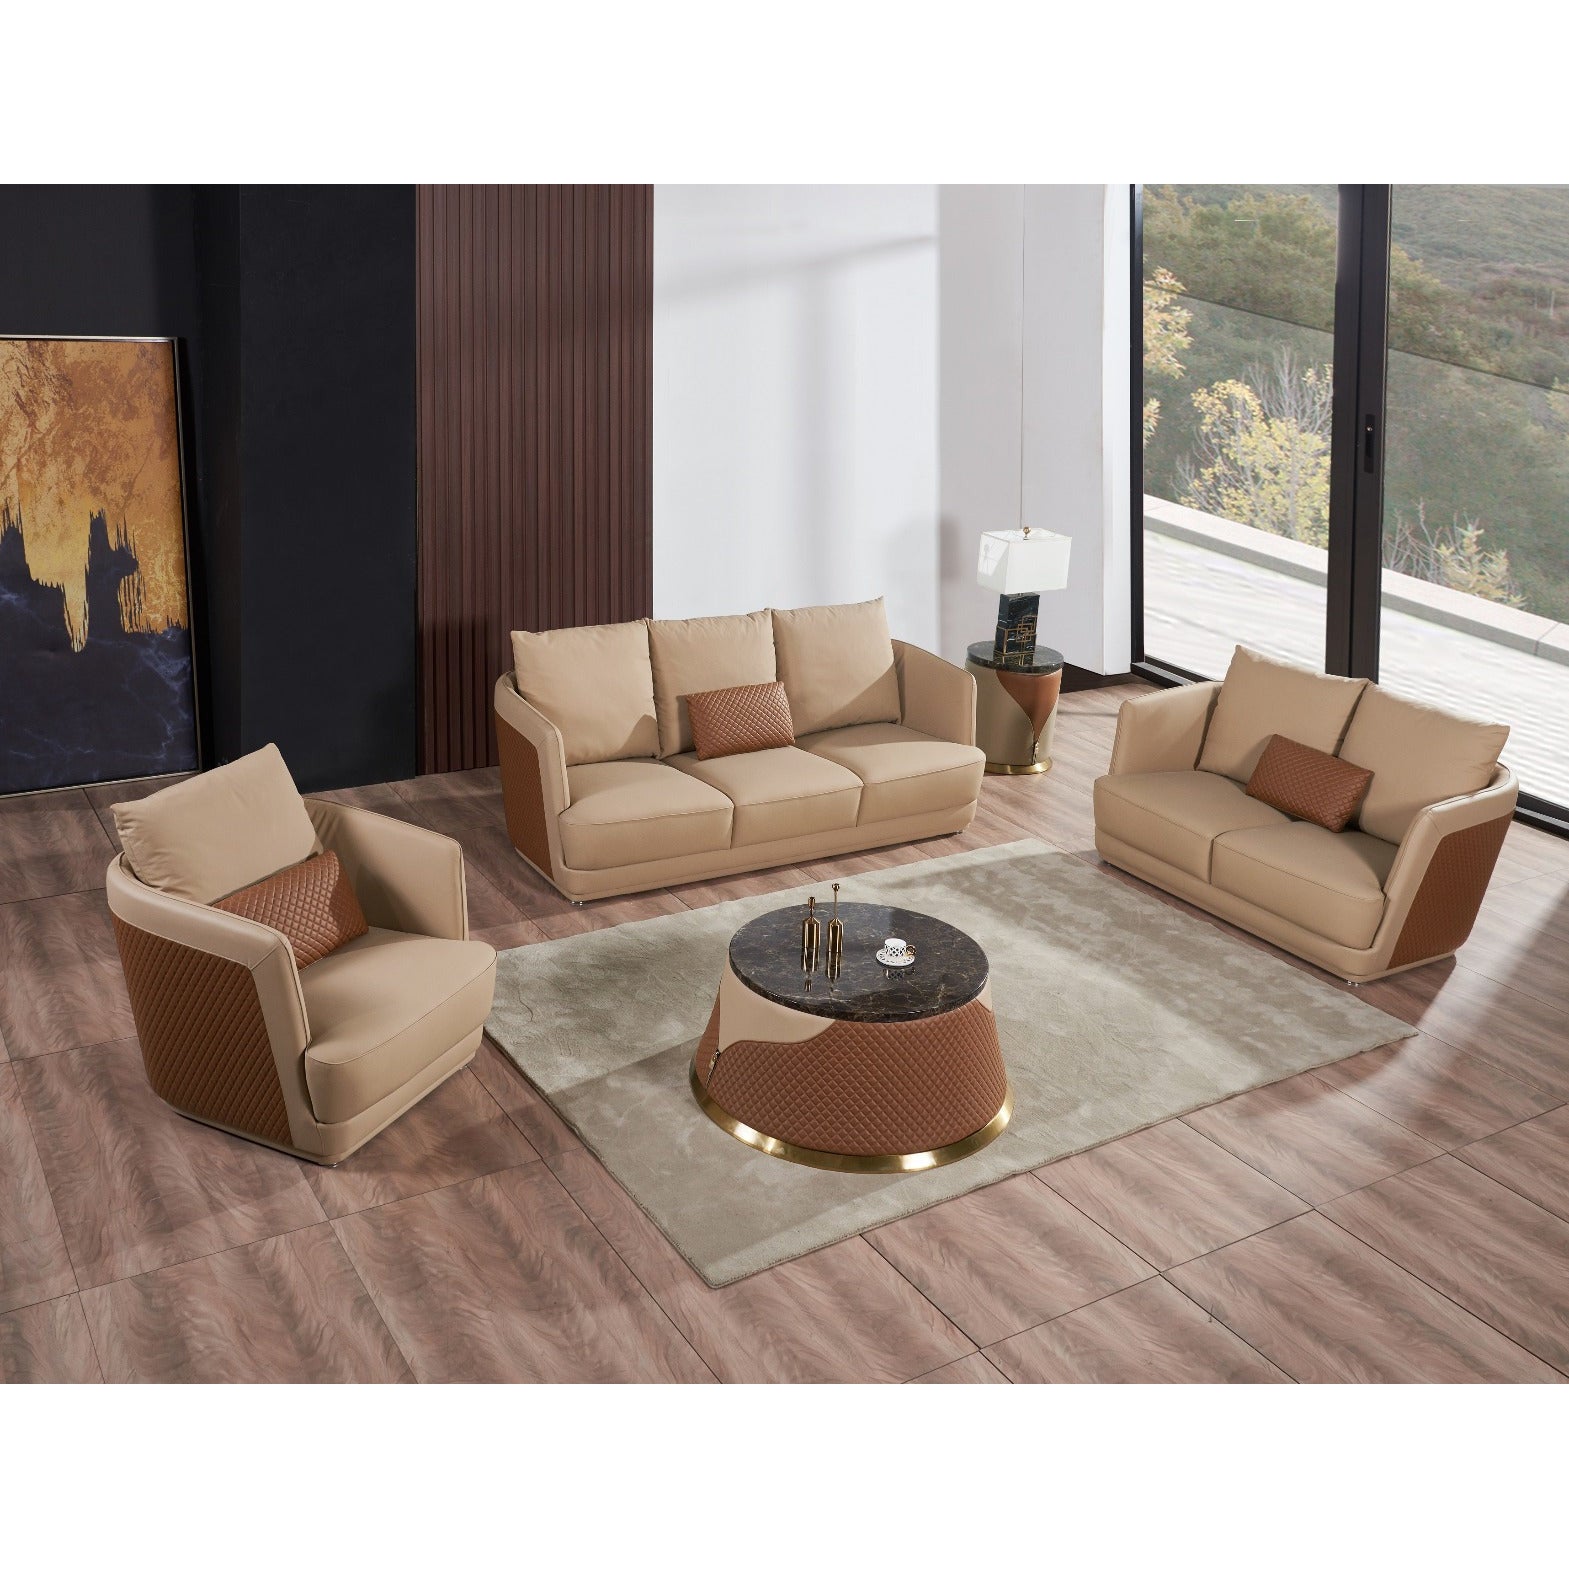 European Furniture - Glamour Ovesize Sofa in Tan-Brown - 51617-4S - New Star Living